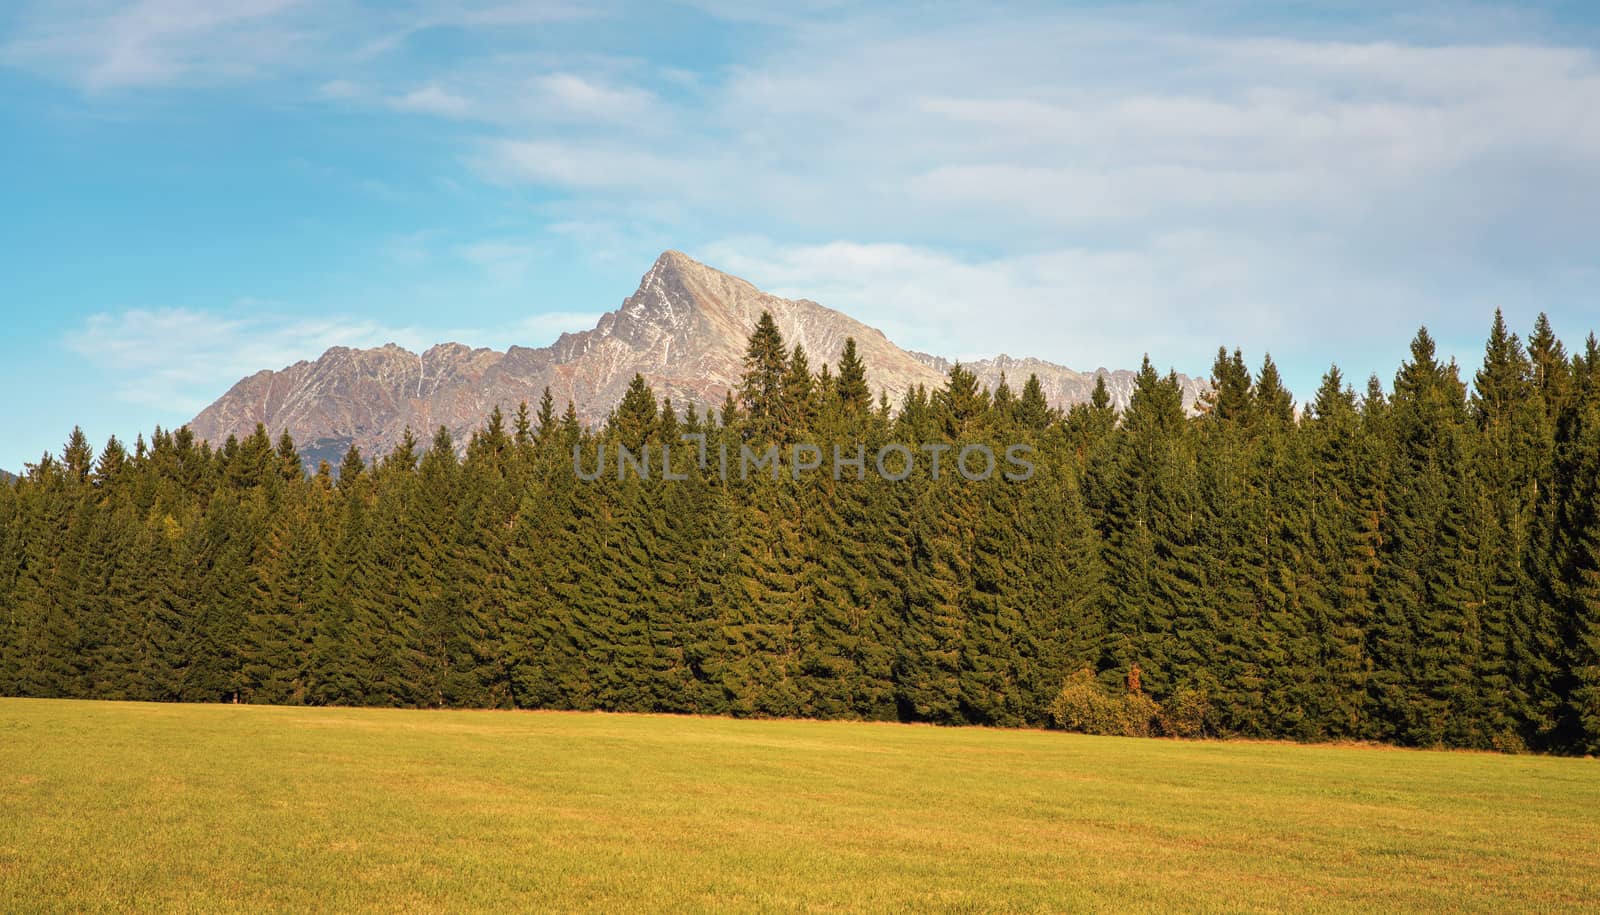 Mount Krivan peak Slovak symbol wide panorama with autumn meadow in foreground, Typical autumnal scenery of Liptov region, Slovakia by Ivanko